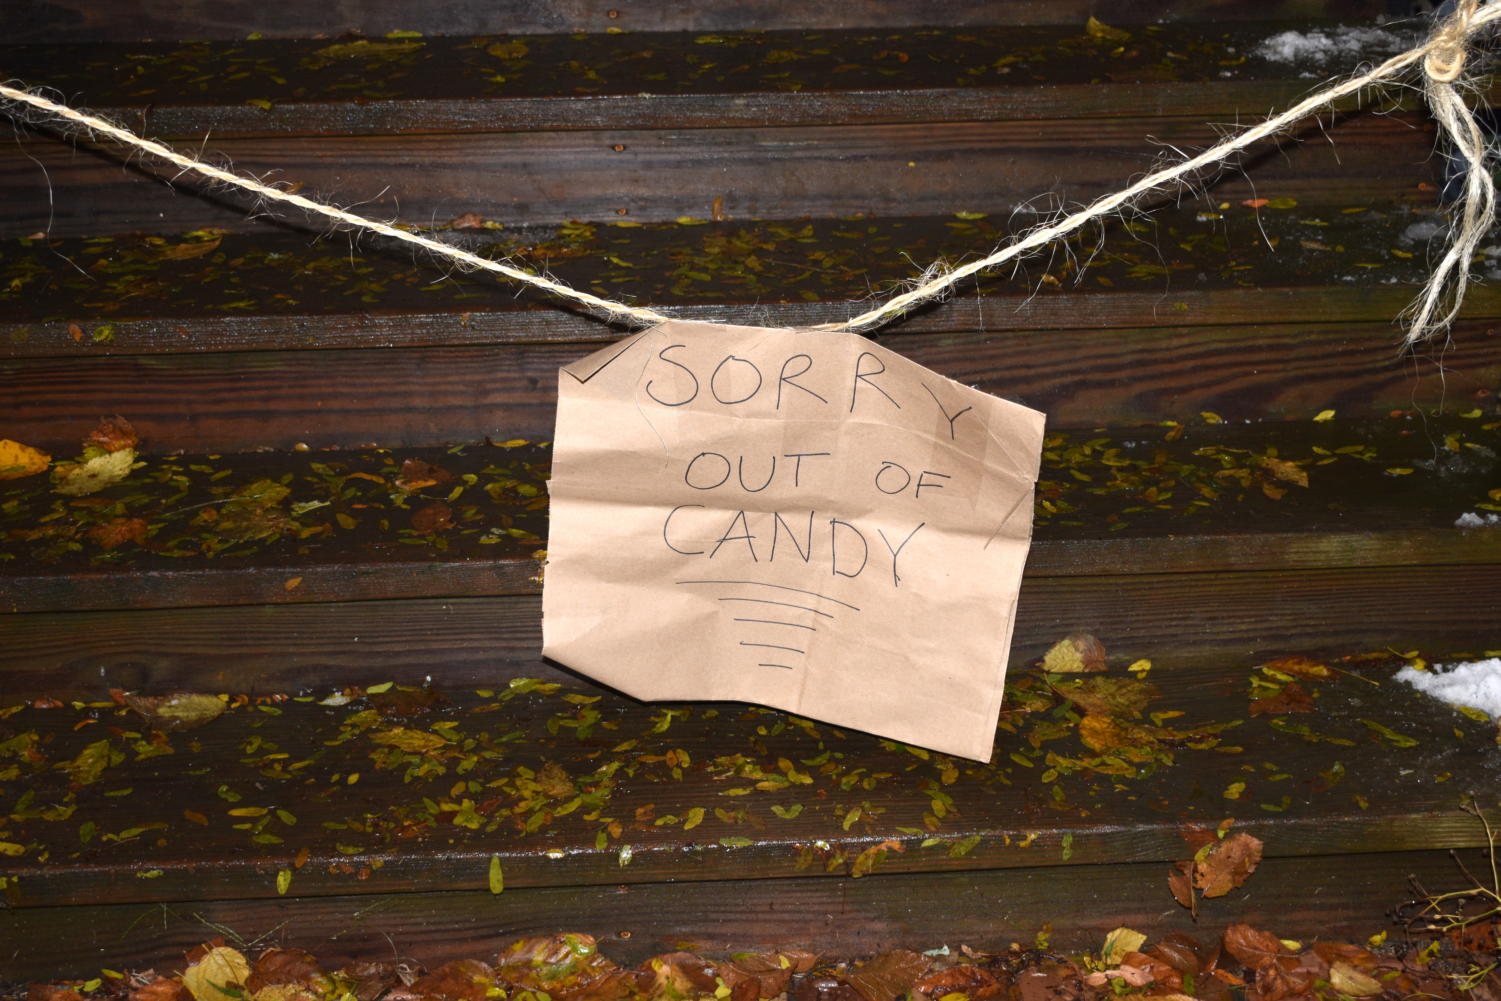 As the night continued, more and more houses ran out of candy and set up “Out of Candy” signs.